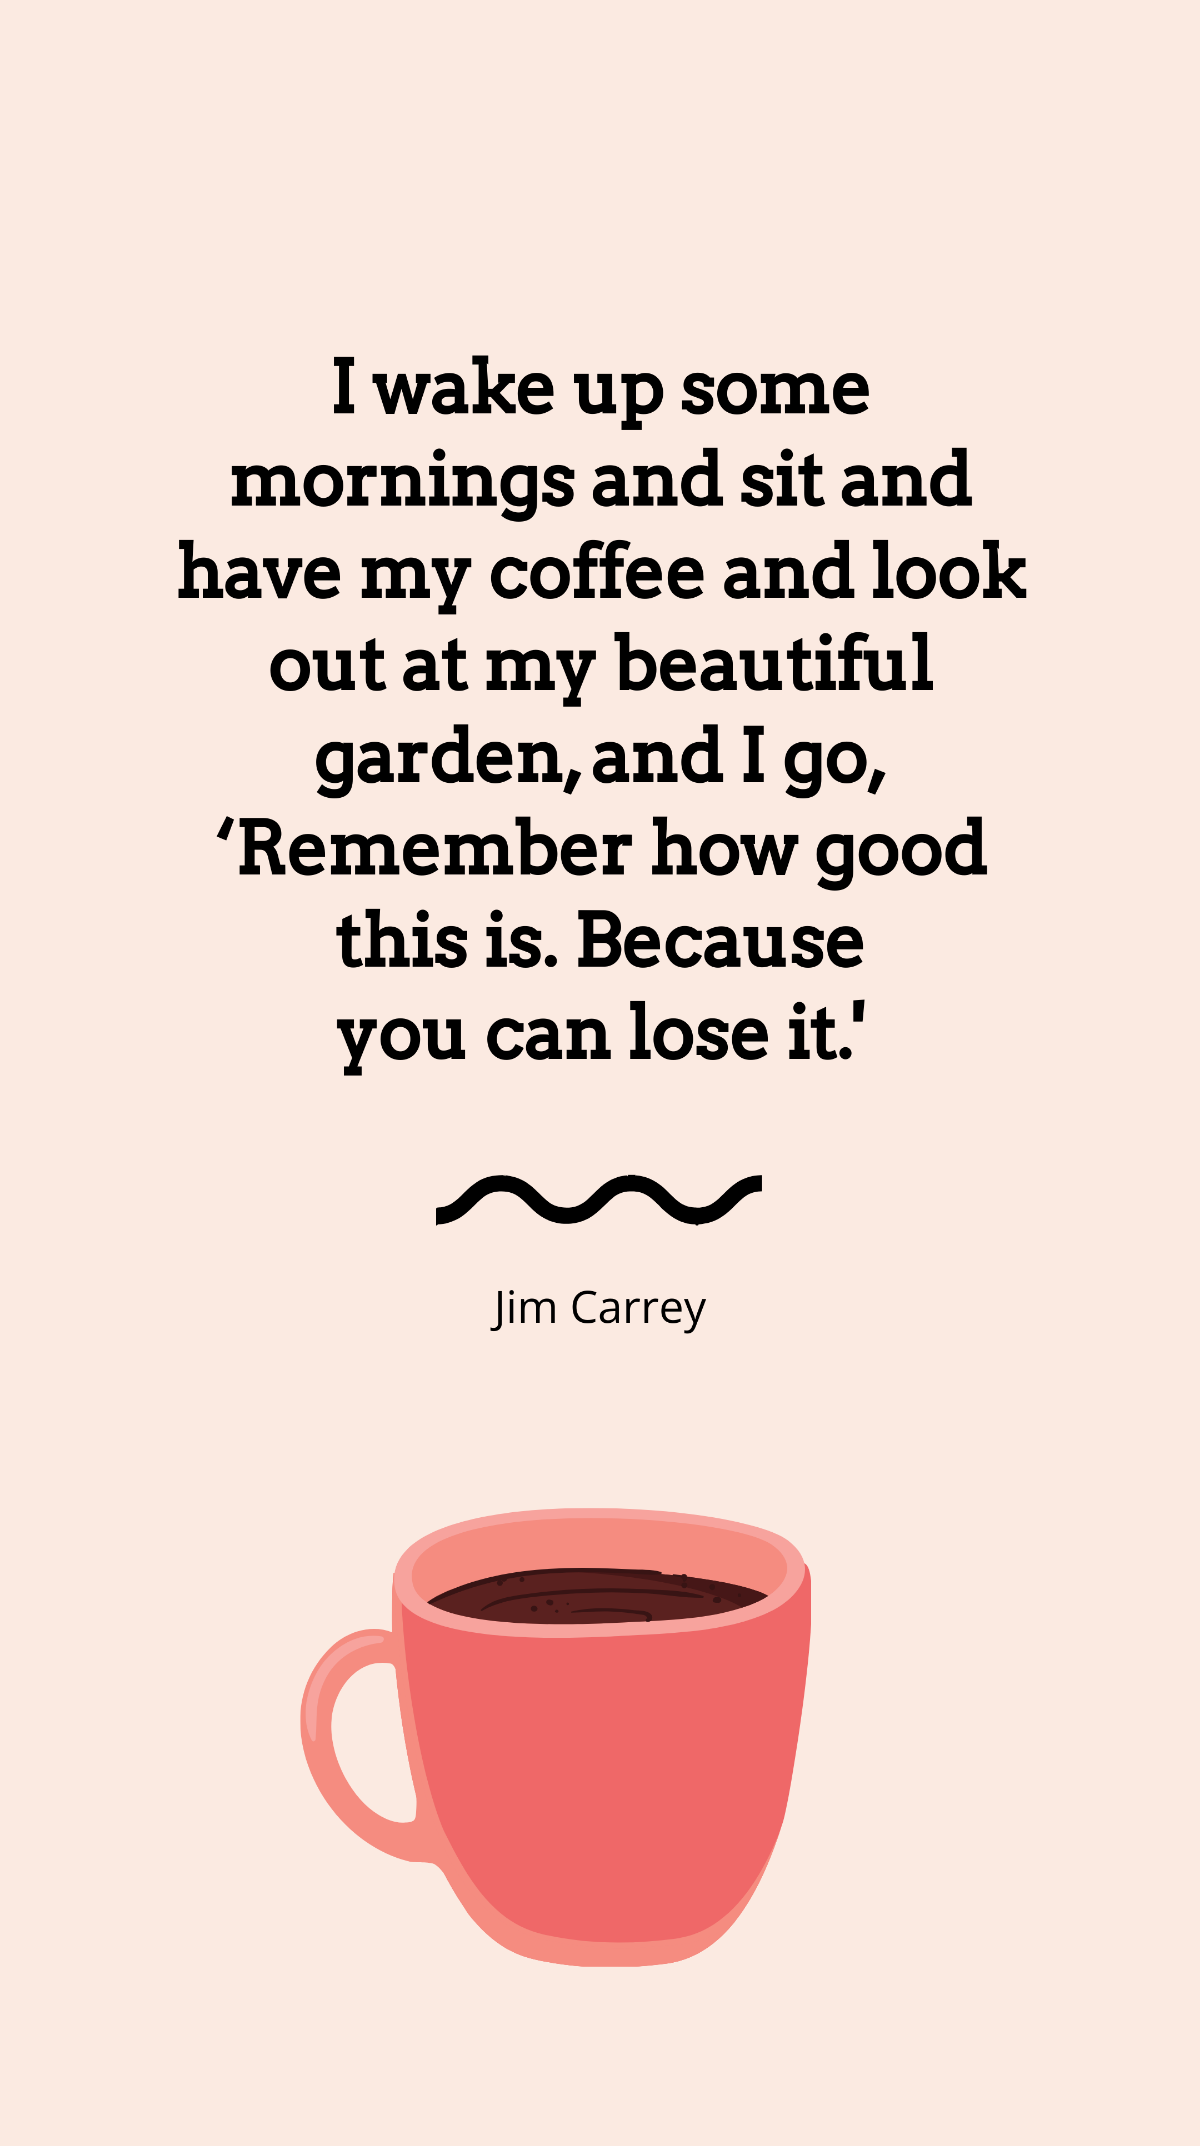 Jim Carrey - I wake up some mornings and sit and have my coffee and look out at my beautiful garden, and I go, ‘Remember how good this is. Because you can lose it.' Template